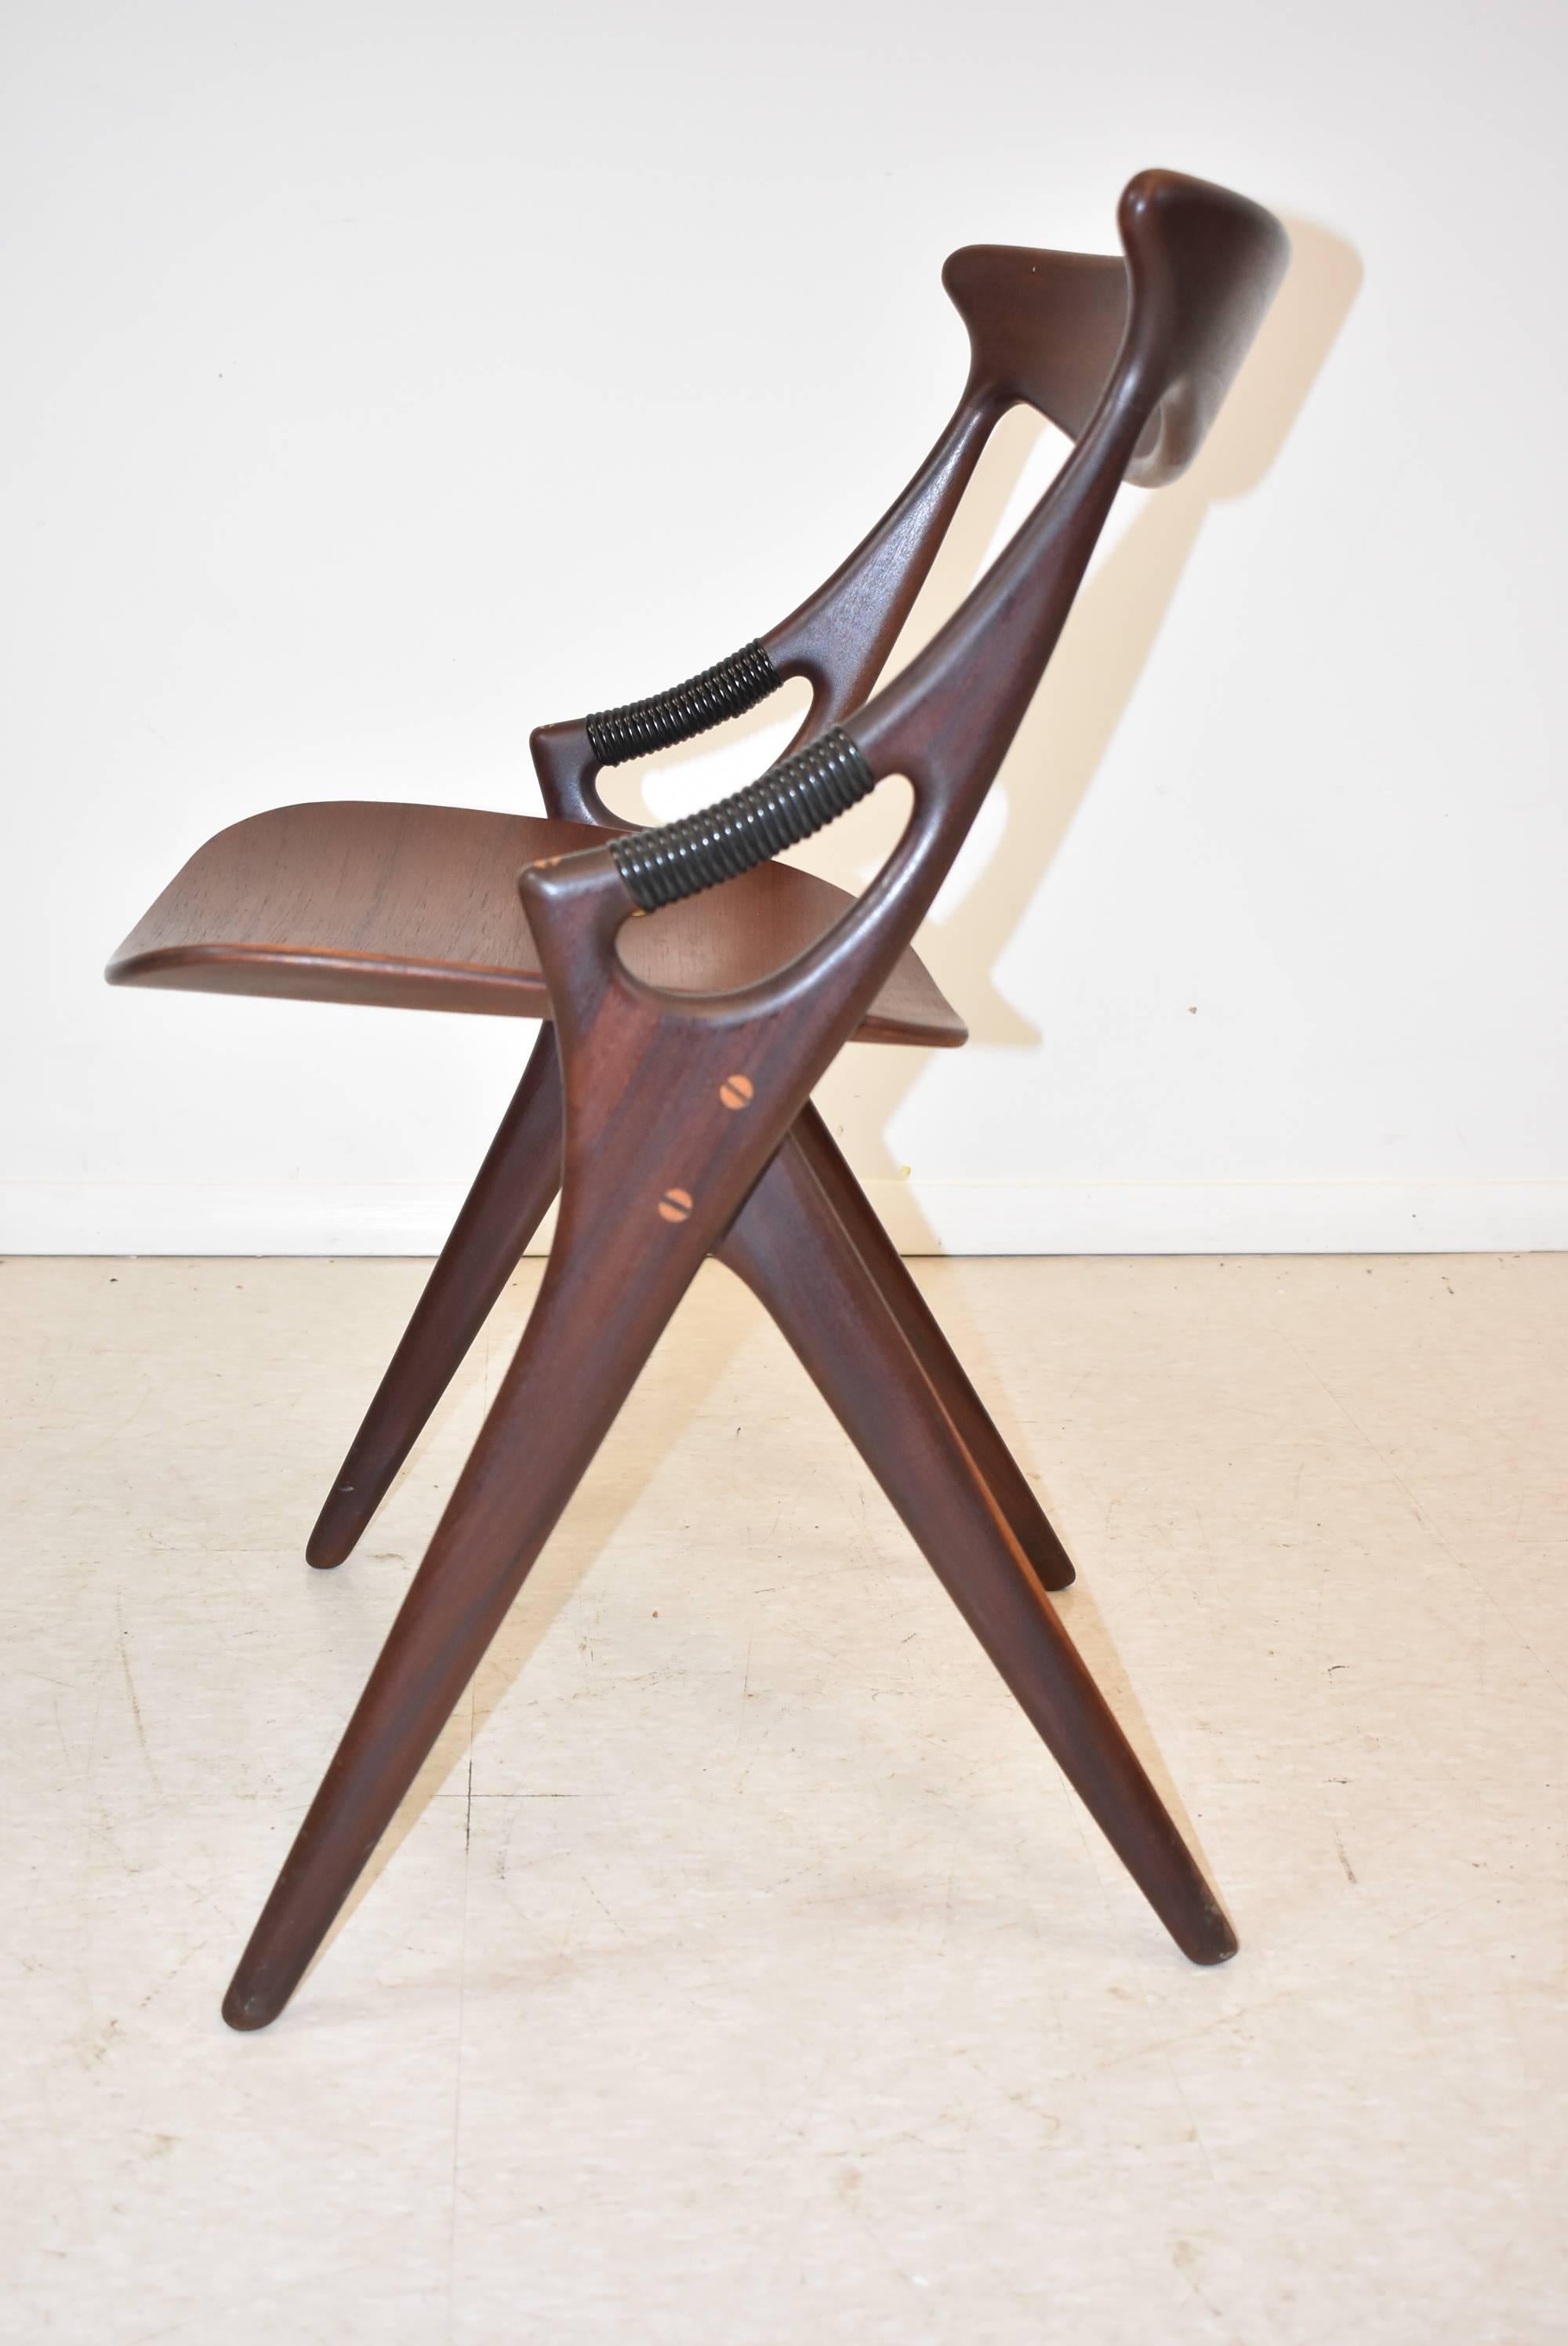 A park of model 71 chairs by Arne Hovmand Olendm, (Denmark 1919-1989) for Mogens Kold Møbelfabrik, circa 1950s. This chair has a unique shape with the most amazing teak arms with wrapped arm supports and bent plywood seats. The chair has subtle